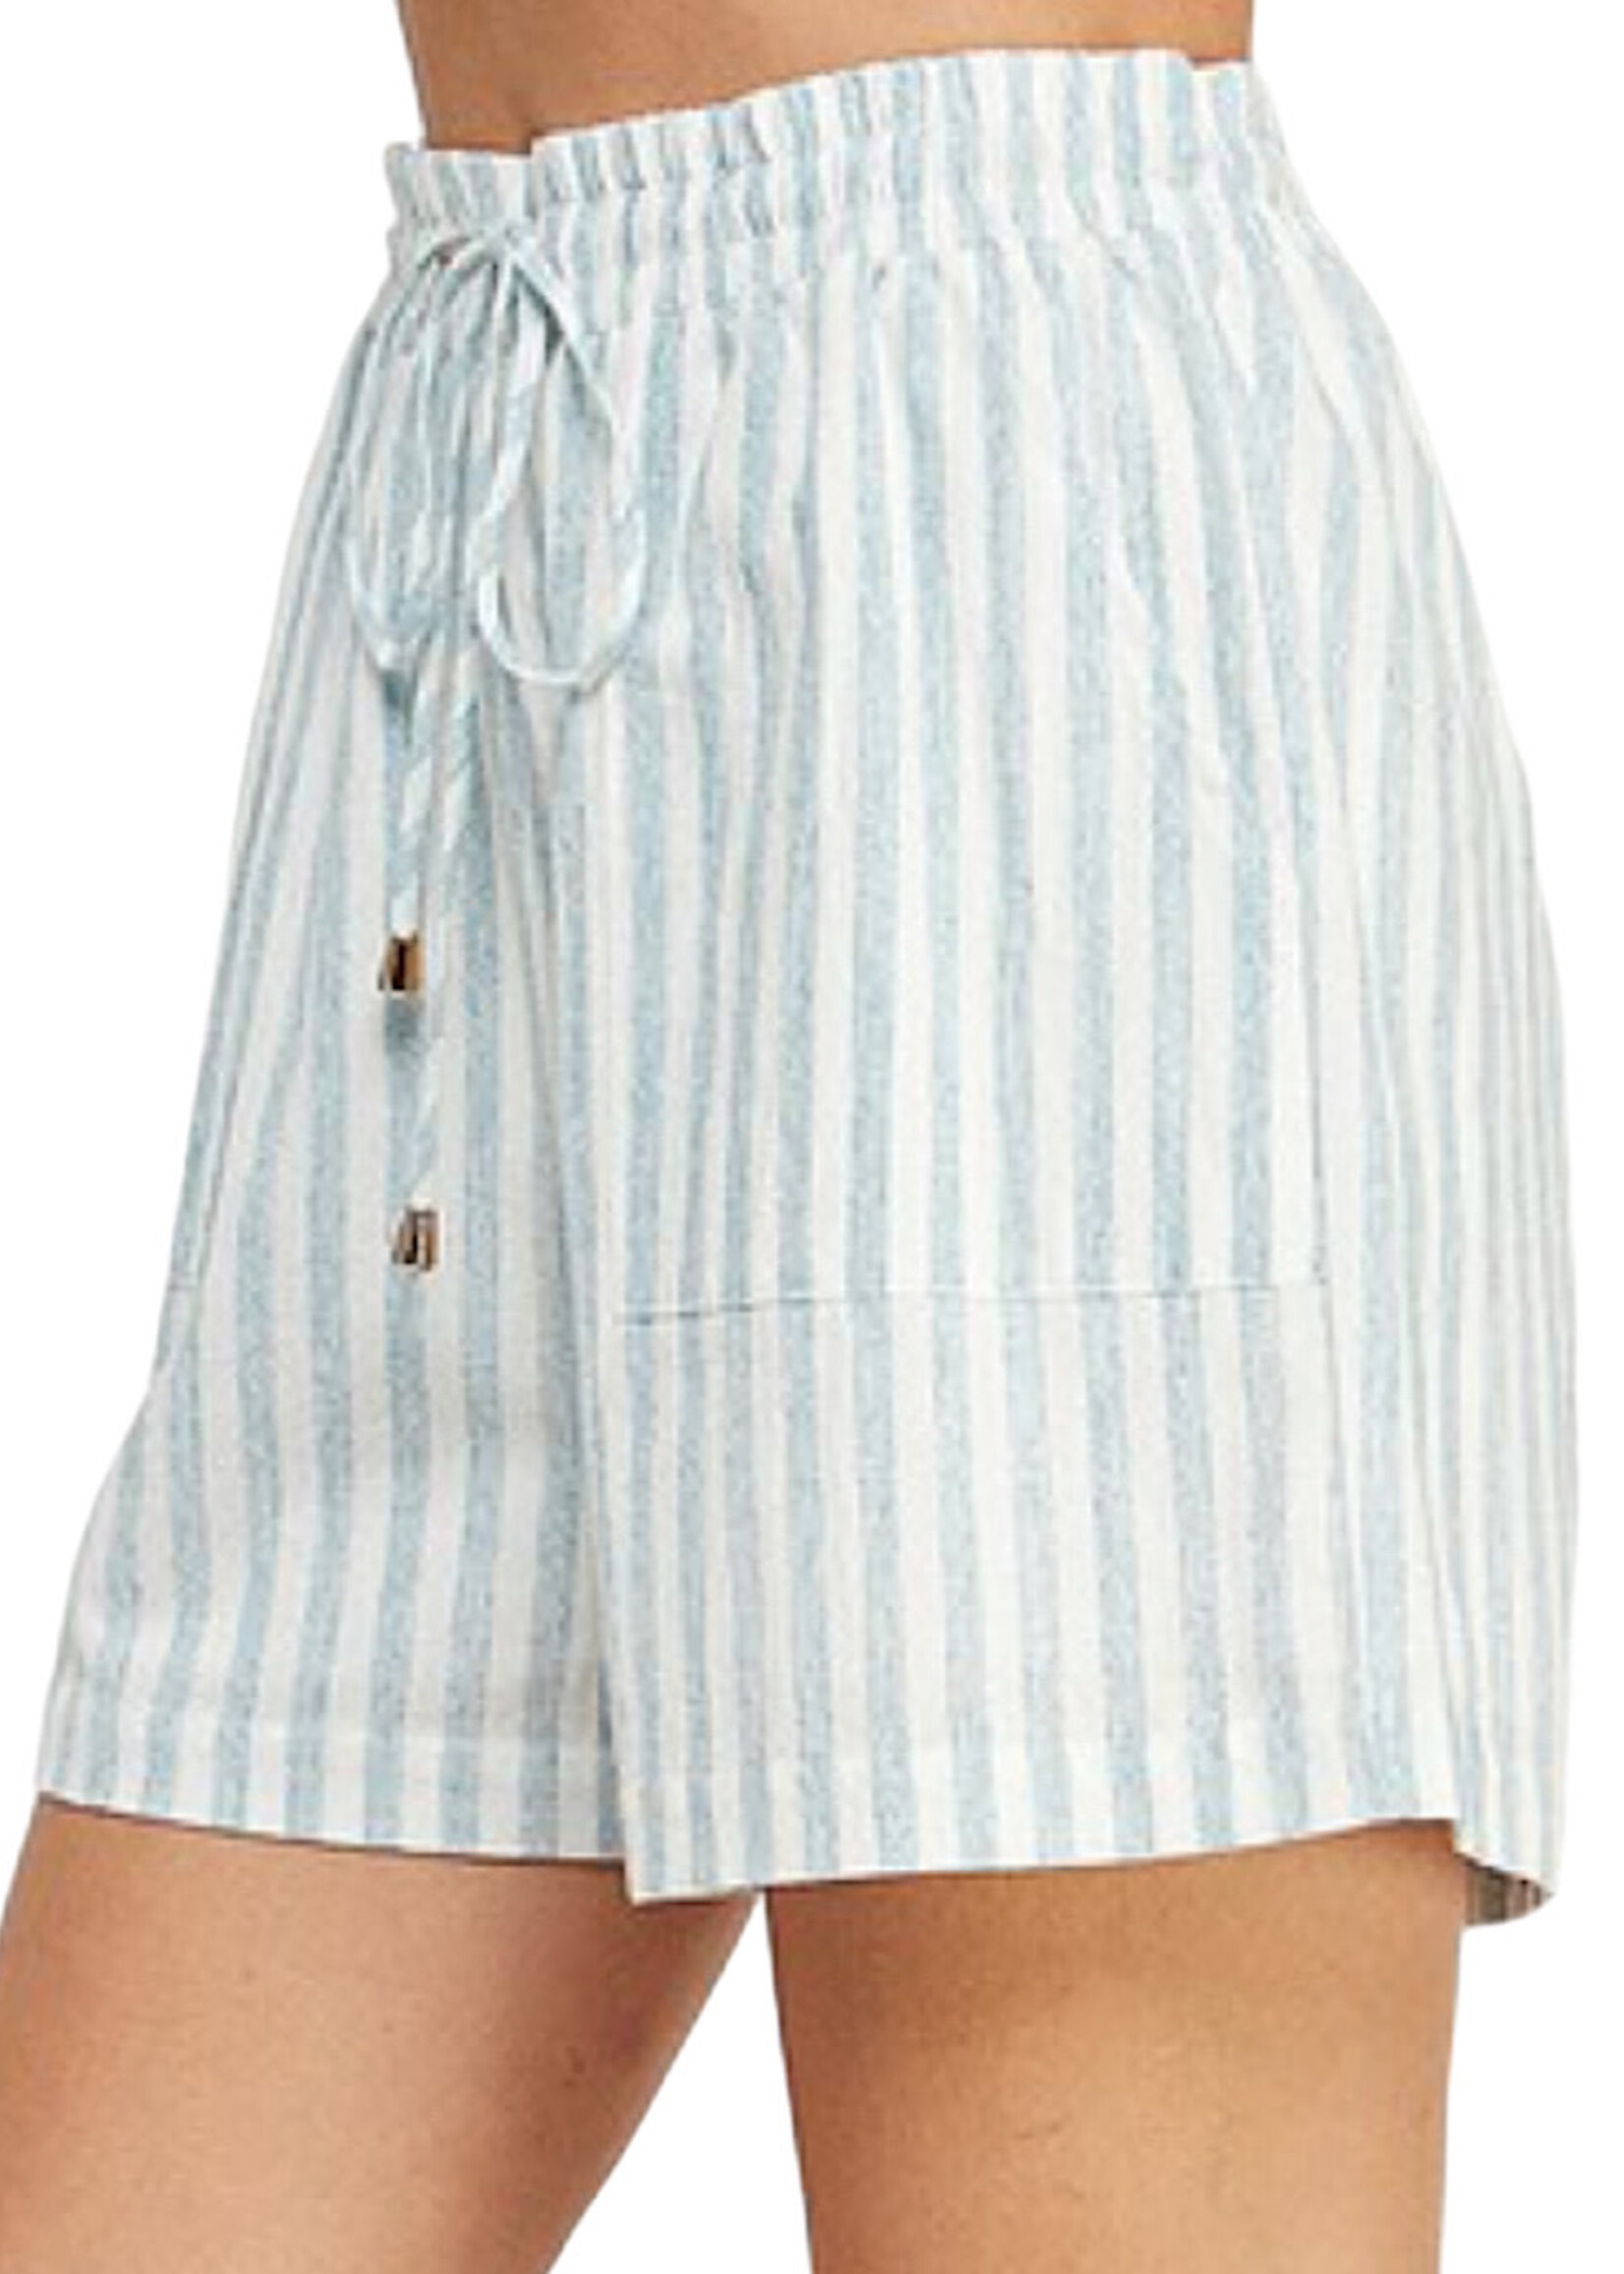 Soft Blue Striped Soft Linen Shorts with Elastic Tie Waist